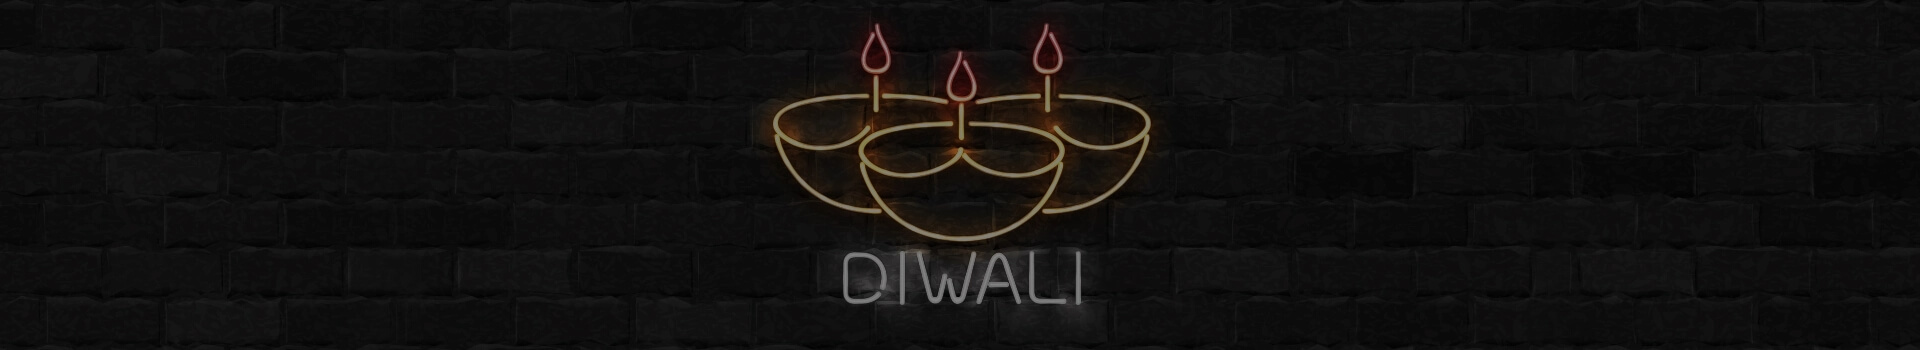 Light Up Diwali Nights with Neon Delight!